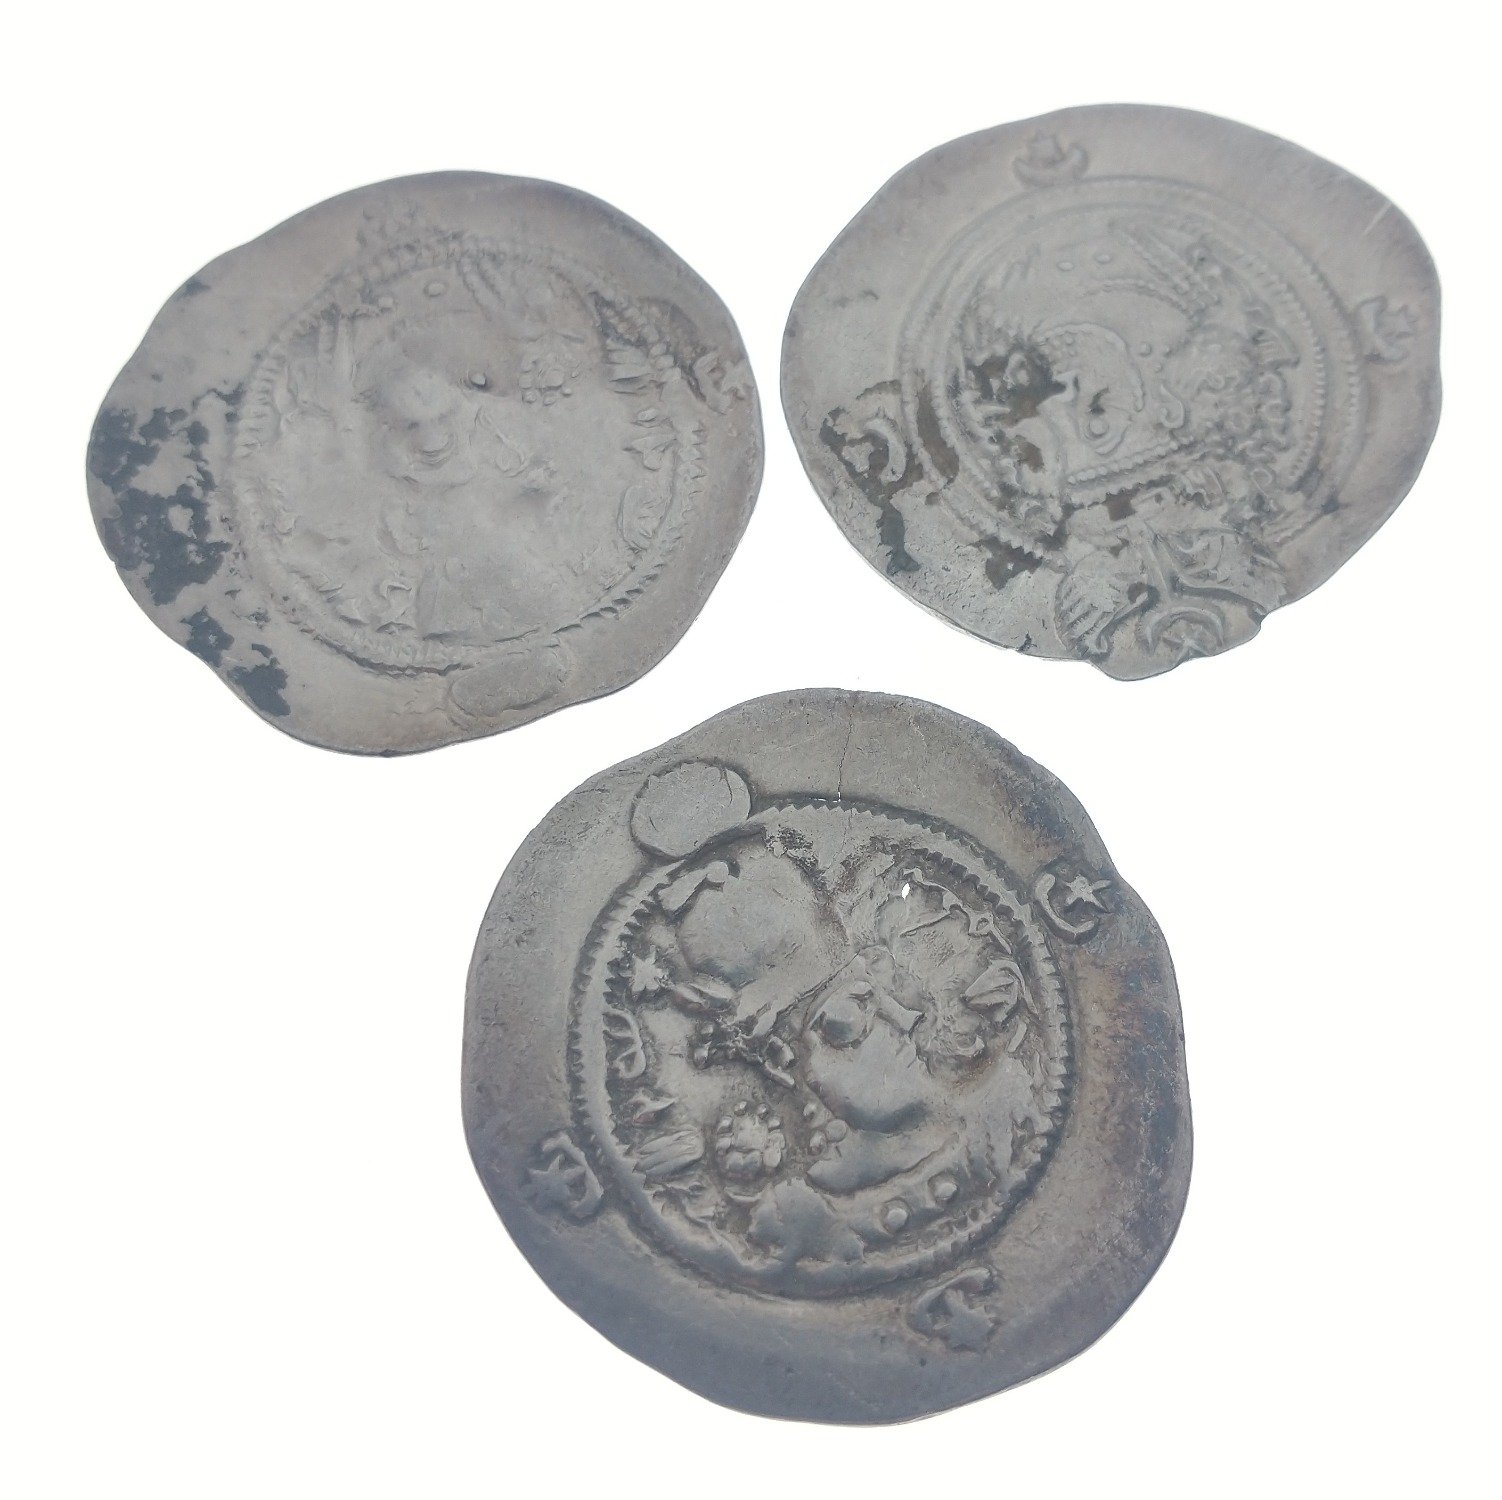 Three large very old HAMMERED COINS - diameter 3cm approx, each coin has a different hammer